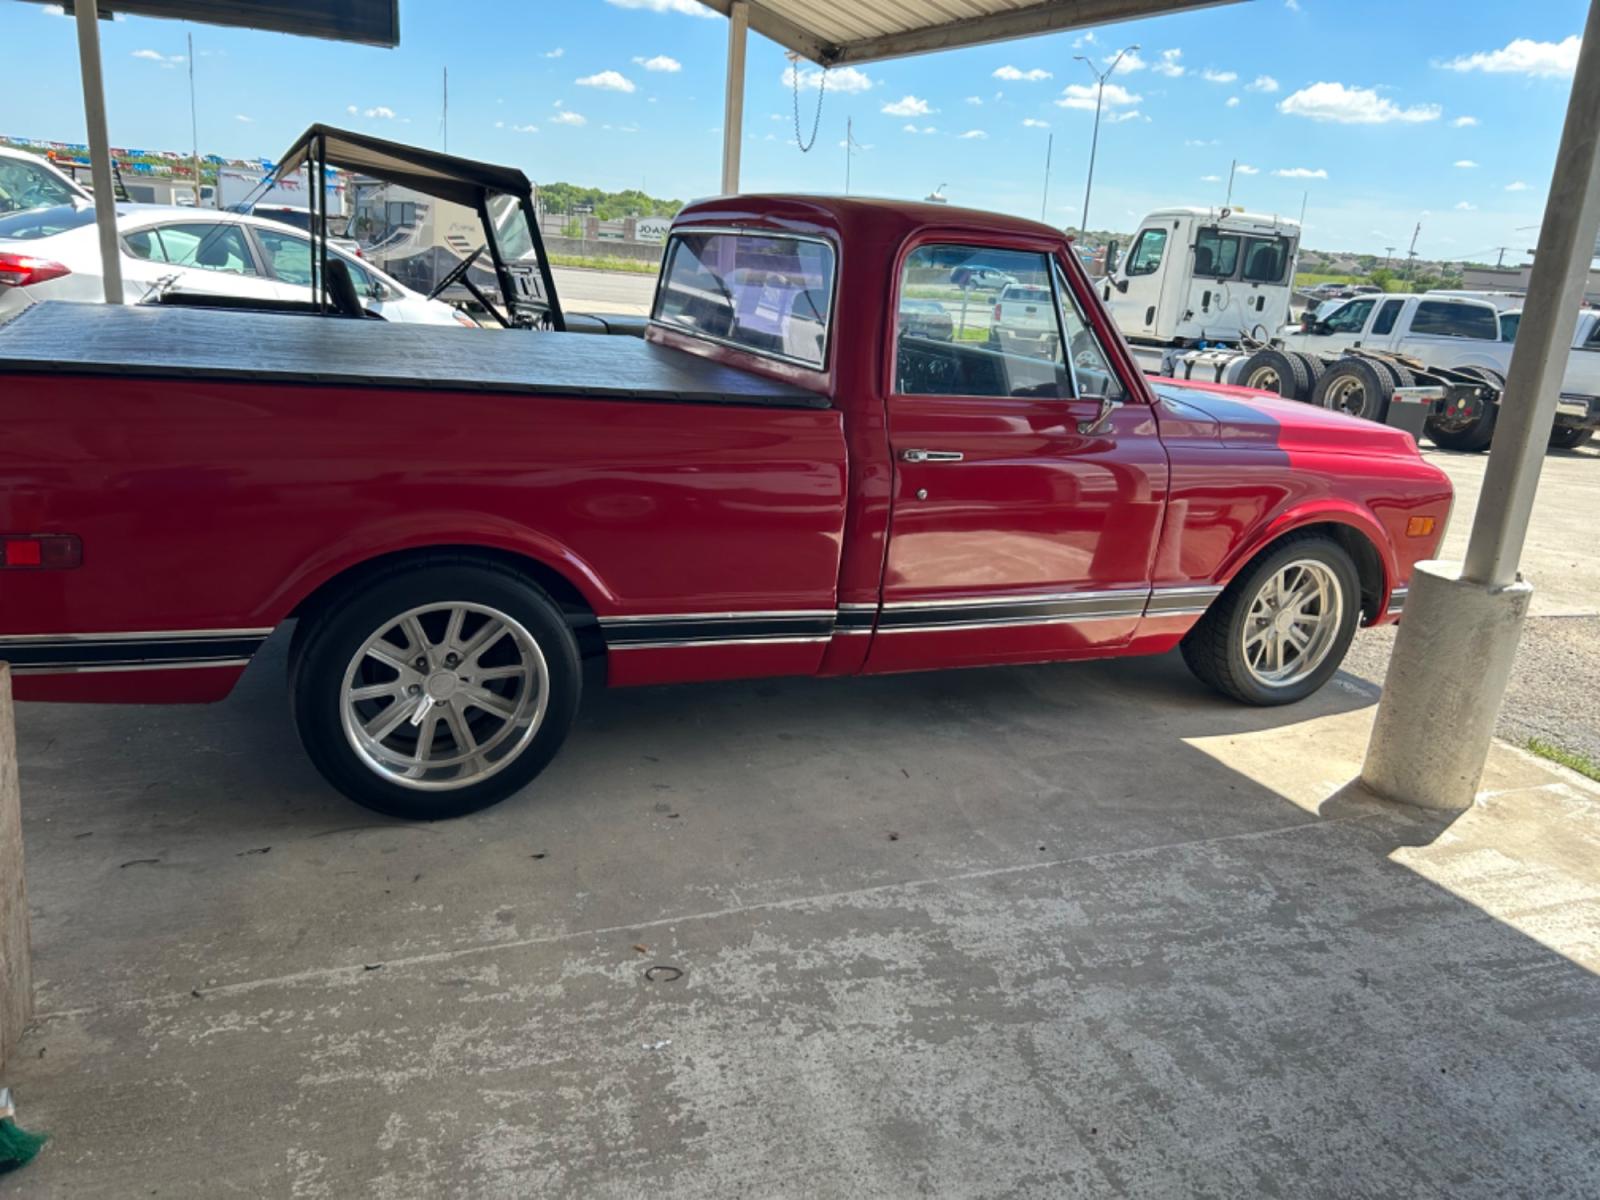 1972 Red Chevrolet C10 (CCE142A1201) , Automatic transmission, located at 1687 Business 35 S, New Braunfels, TX, 78130, (830) 625-7159, 29.655487, -98.051491 - 580 Horse Power - Photo #4